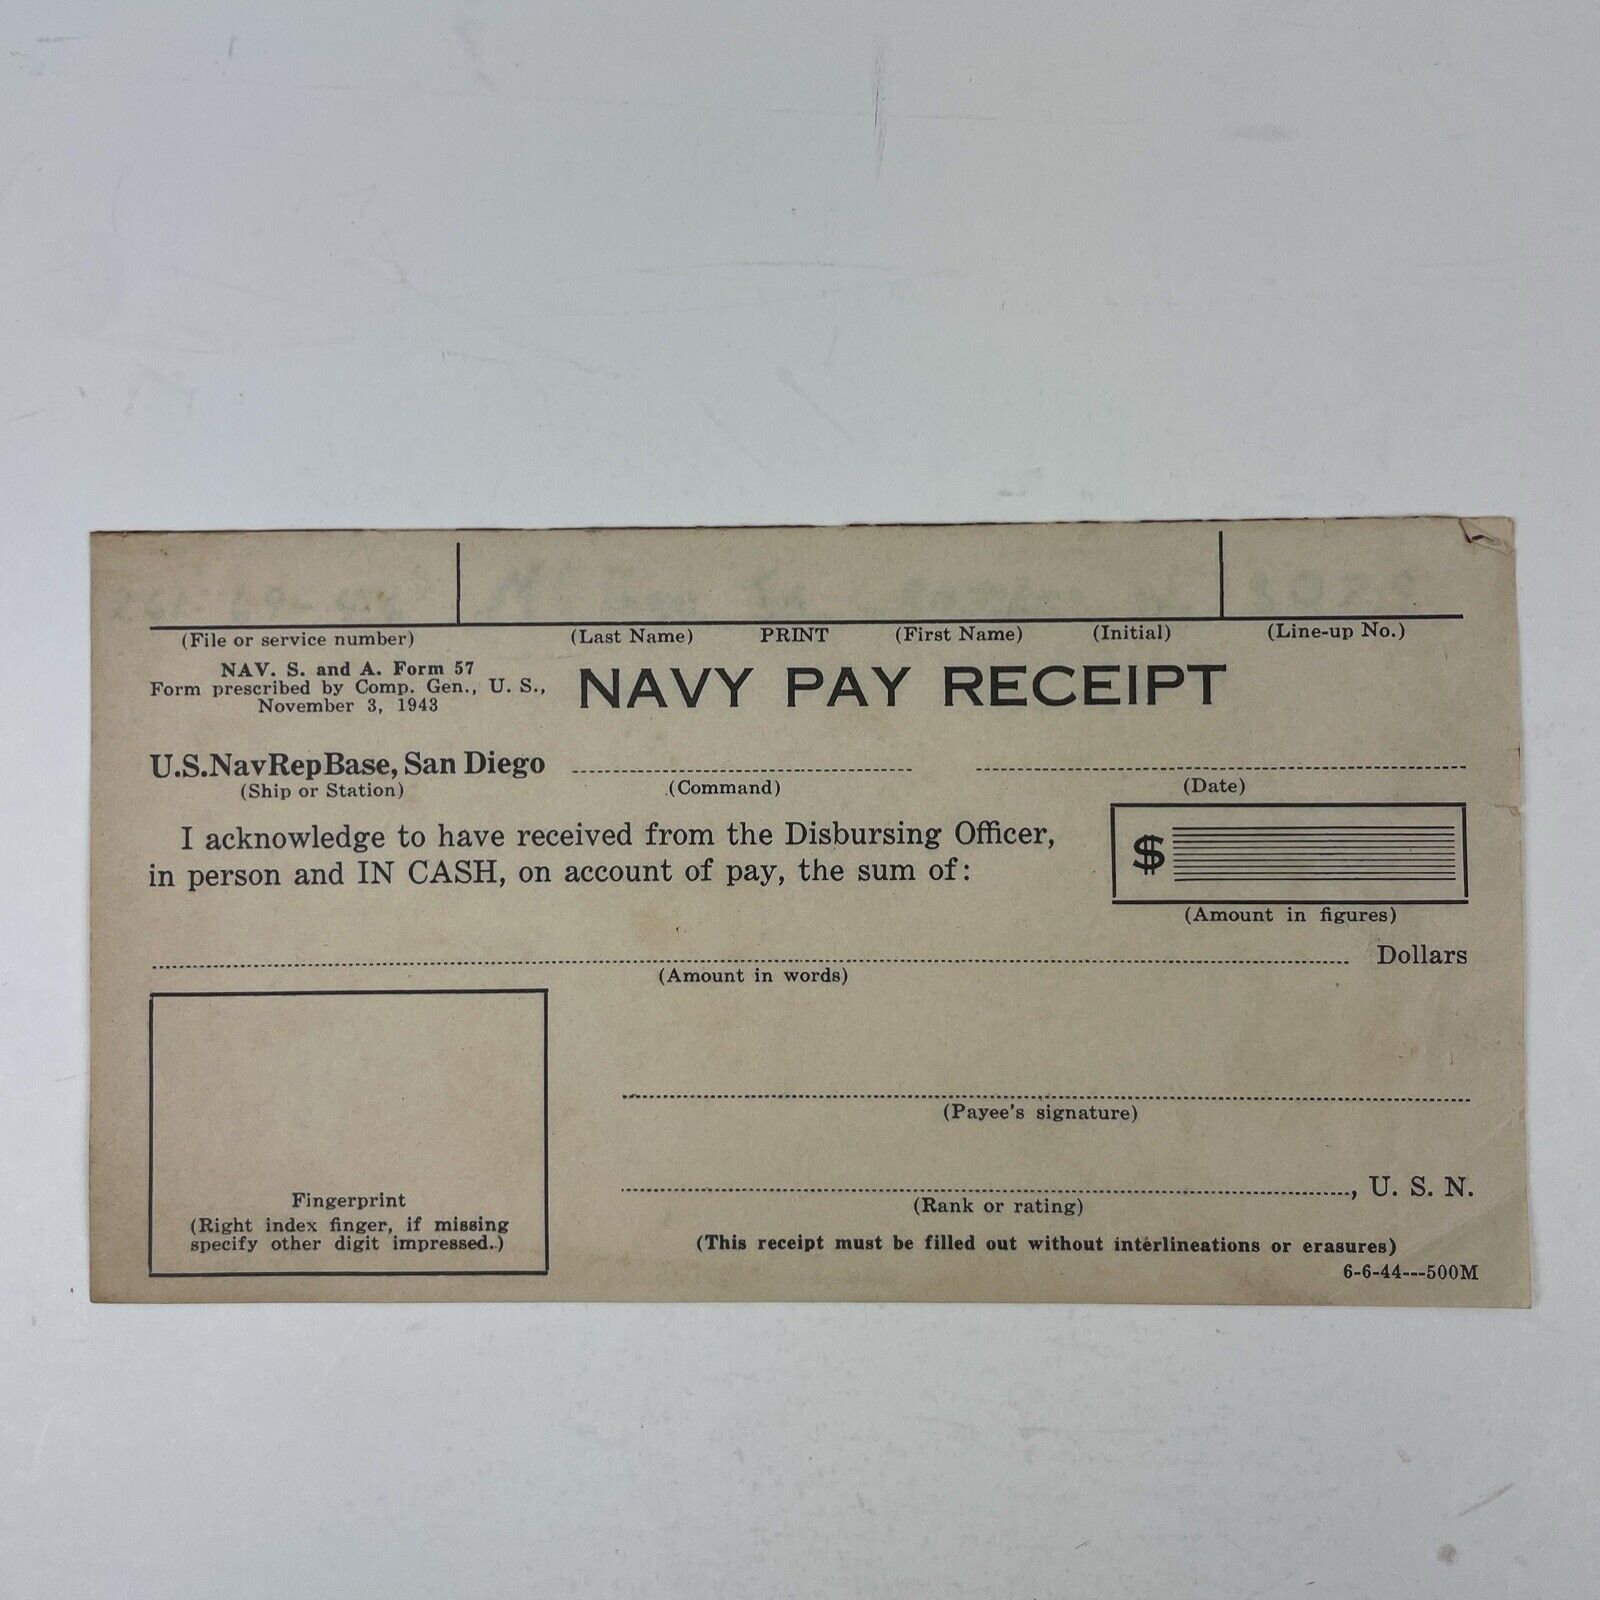 WW2 Navy Pay Receipt 1943 Nav. S. And A. Form 57 2 Pages With Inscription 